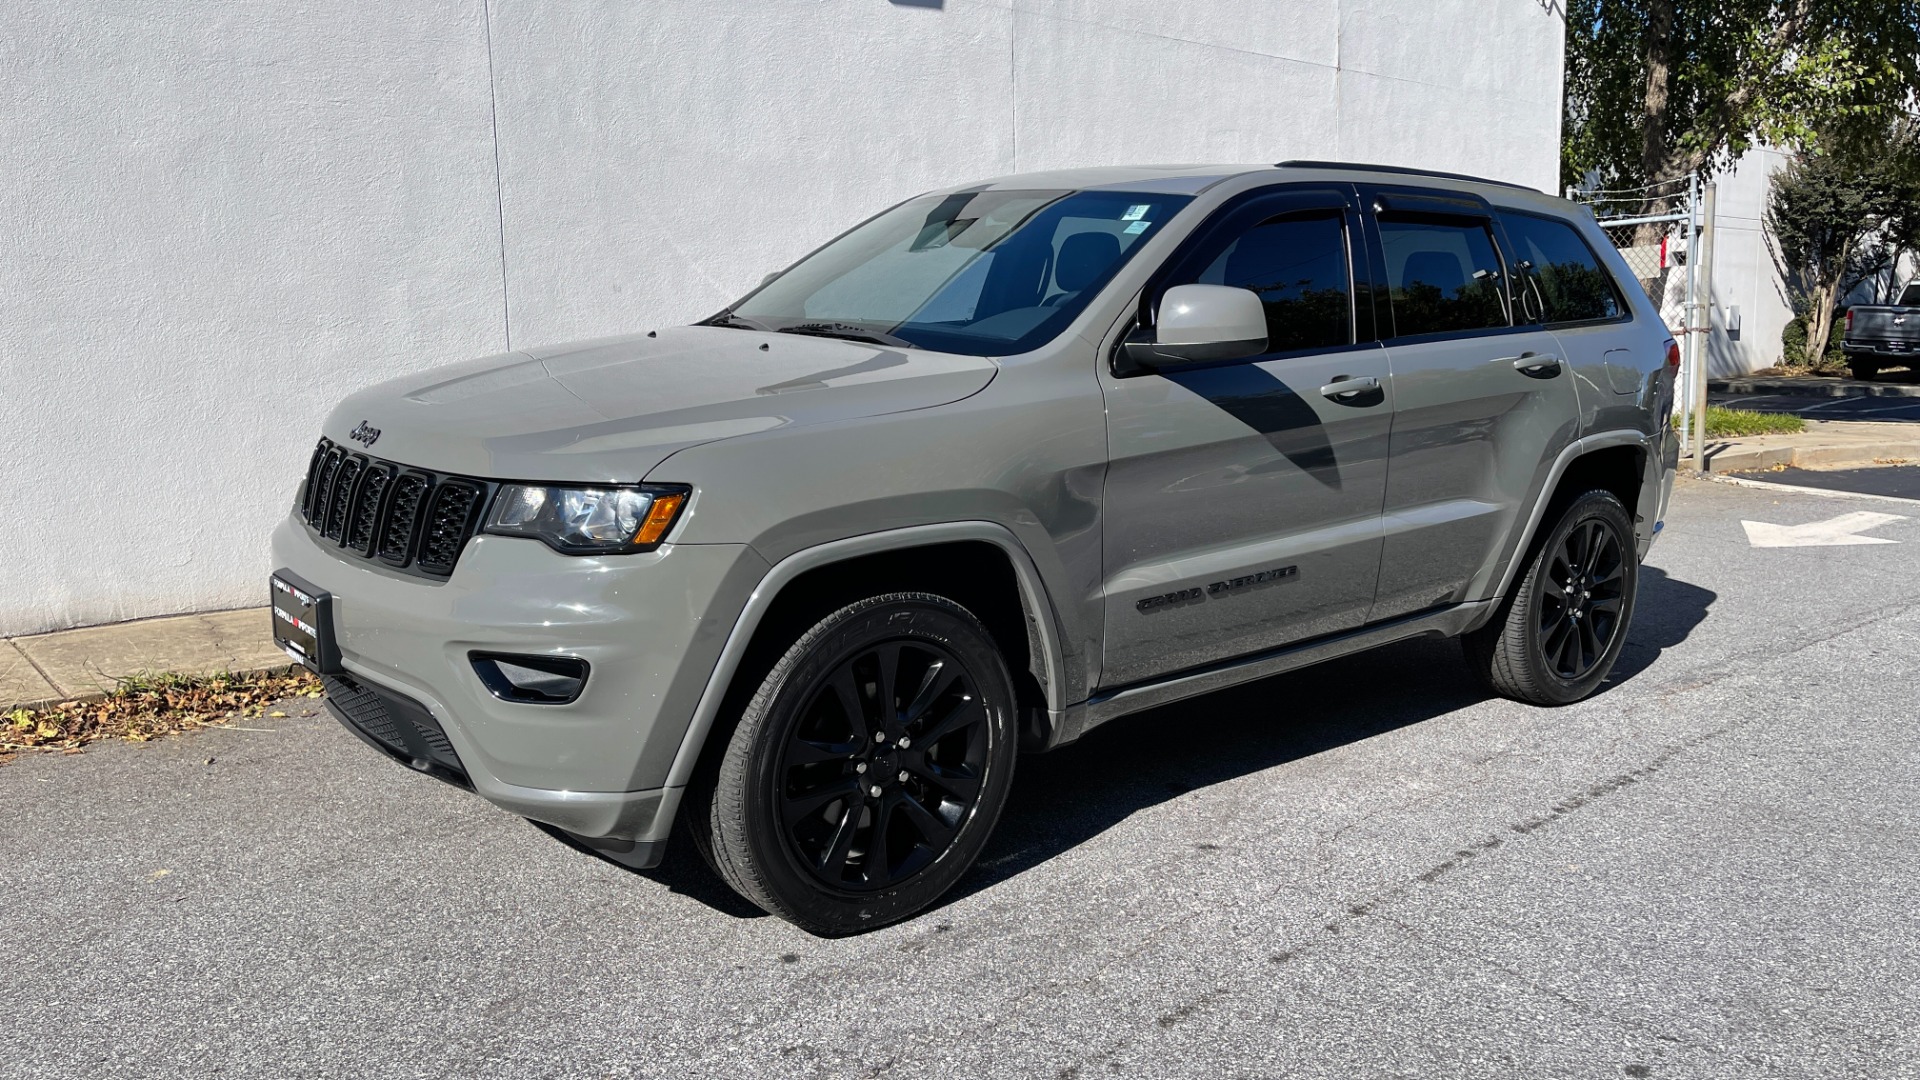 Used 2019 Jeep Grand Cherokee ALTITUDE / BLACK 20IN WHEELS / BLACK TRIM / SUNROOF / HEATED SEATS for sale $34,495 at Formula Imports in Charlotte NC 28227 6